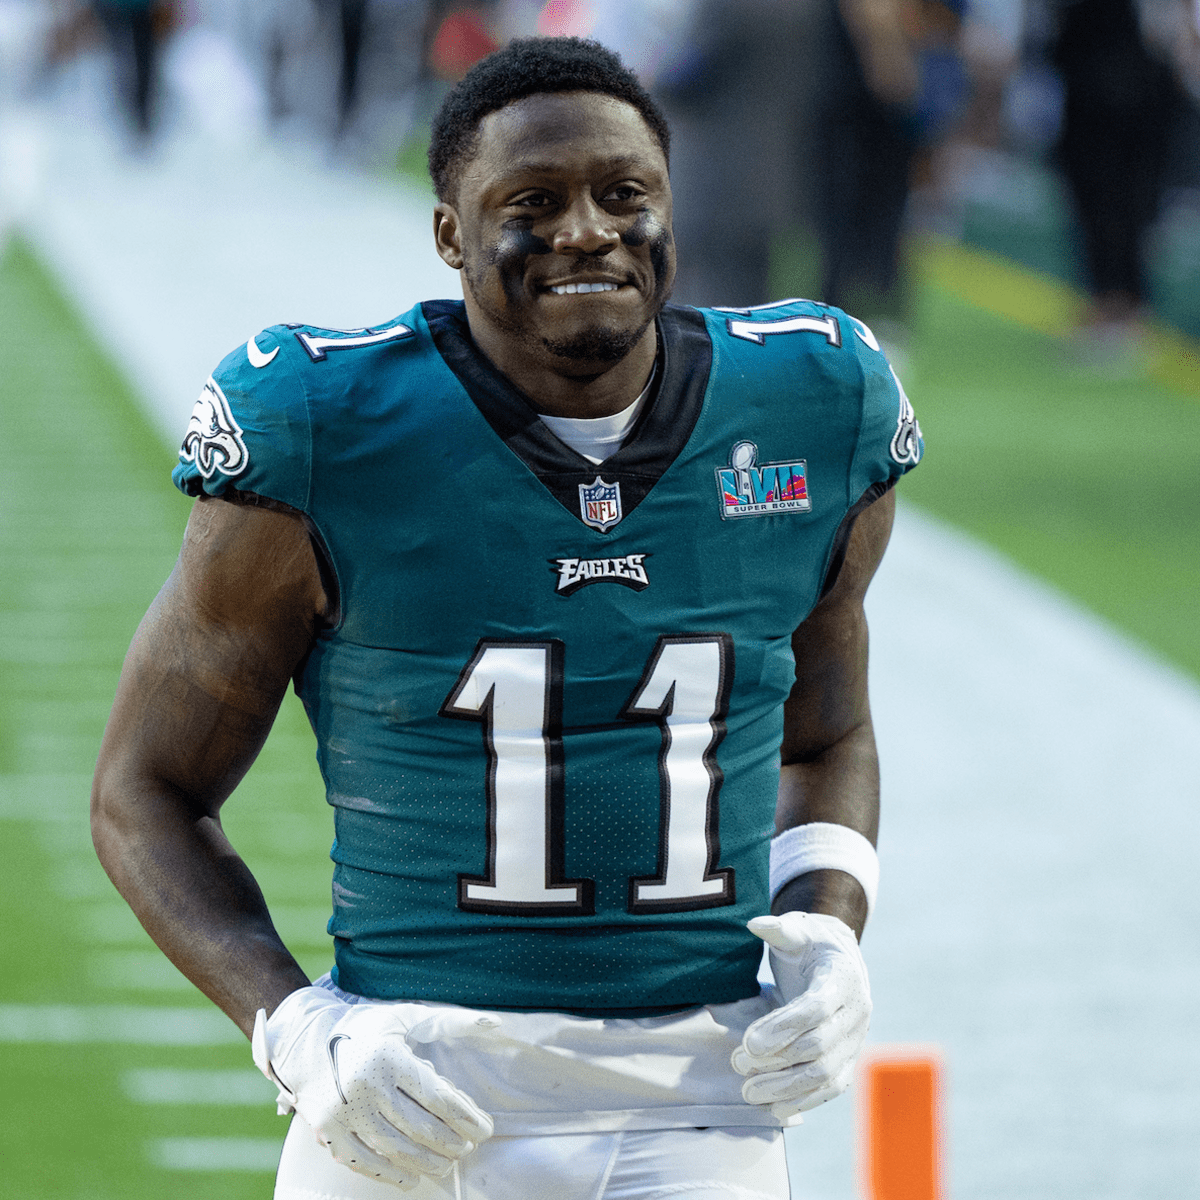 Why was AJ Brown upset despite Eagles leading Giants by a ton of